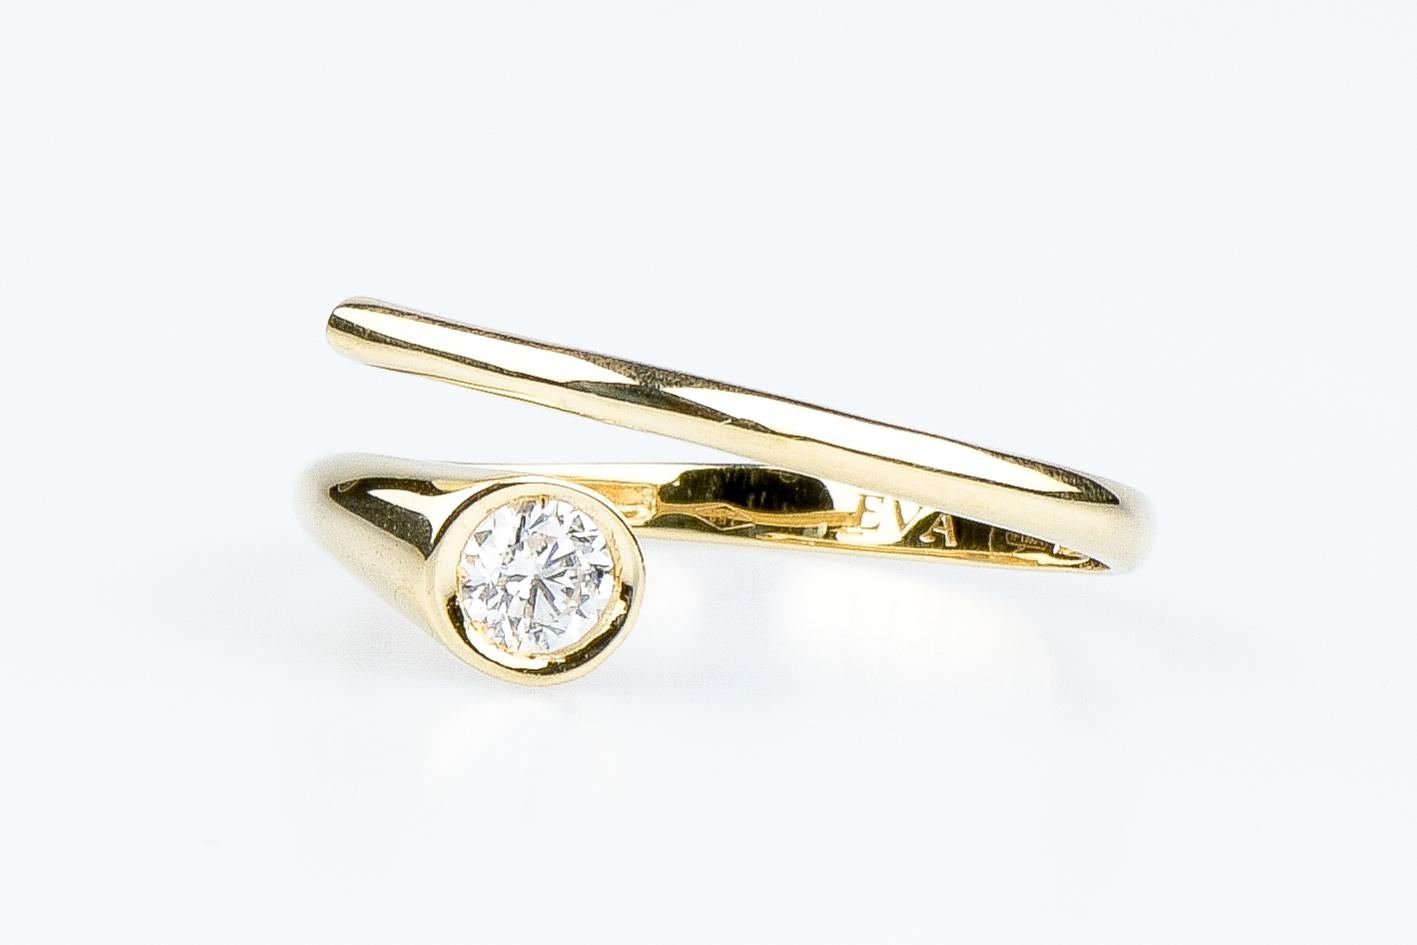 LUCIA model, solid 18-carat yellow gold ring set with a 0.20 carat round brilliant synthetic diamond.

• Carats: 0.20 ct

• Color: DEF

• Clarity: VS

• 1.70 grams

• Dimensions: 0.6 x 0.3 cm (ring head) and 0.1 cm (ring)

• Available sizes (EU): 50